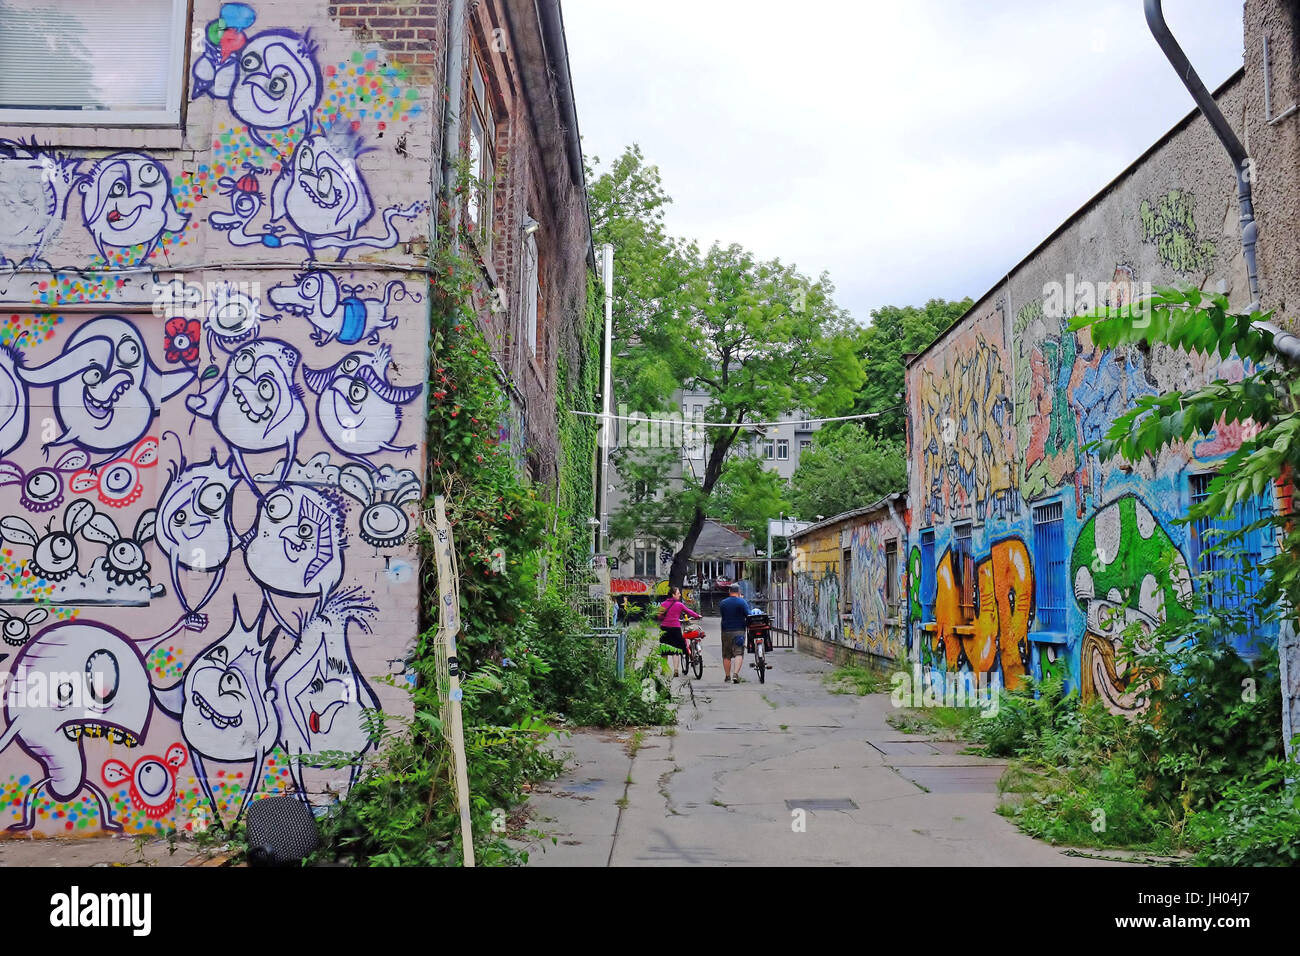 Two people walk their bikes through an alleyway filled with street art/grafitti in the Friedrichshain area of Berlin, Germany Stock Photo